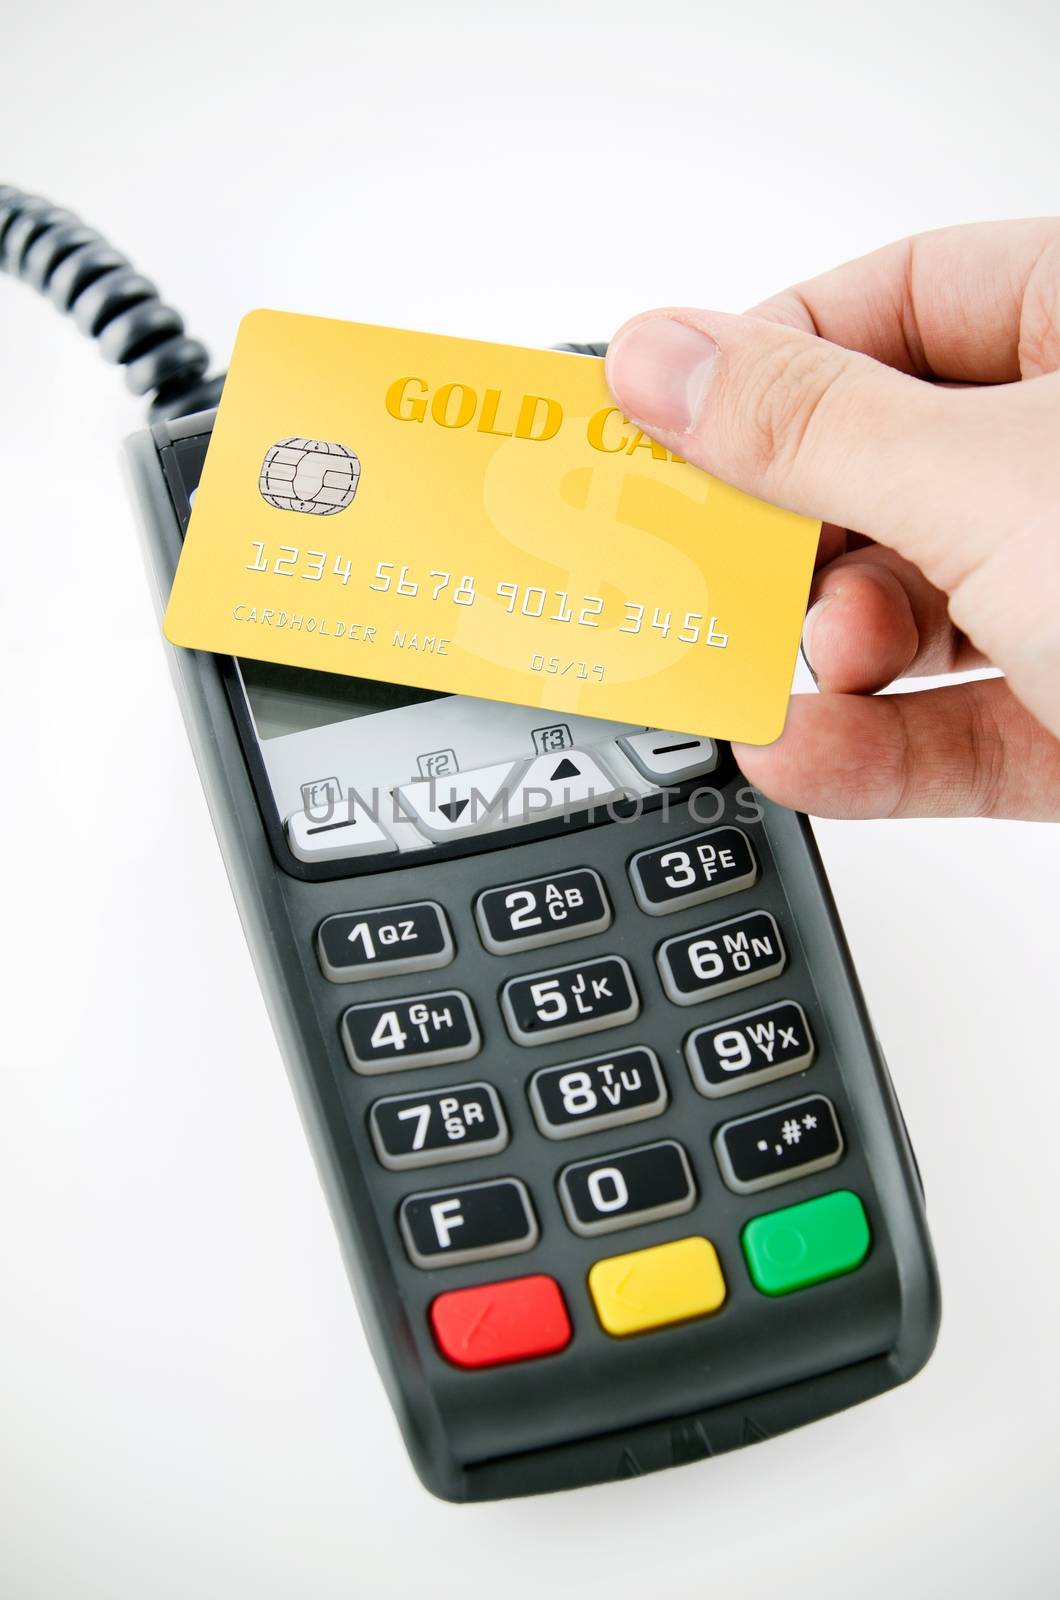 Contactless gold payment card with NFC chip using with terminal  by simpson33